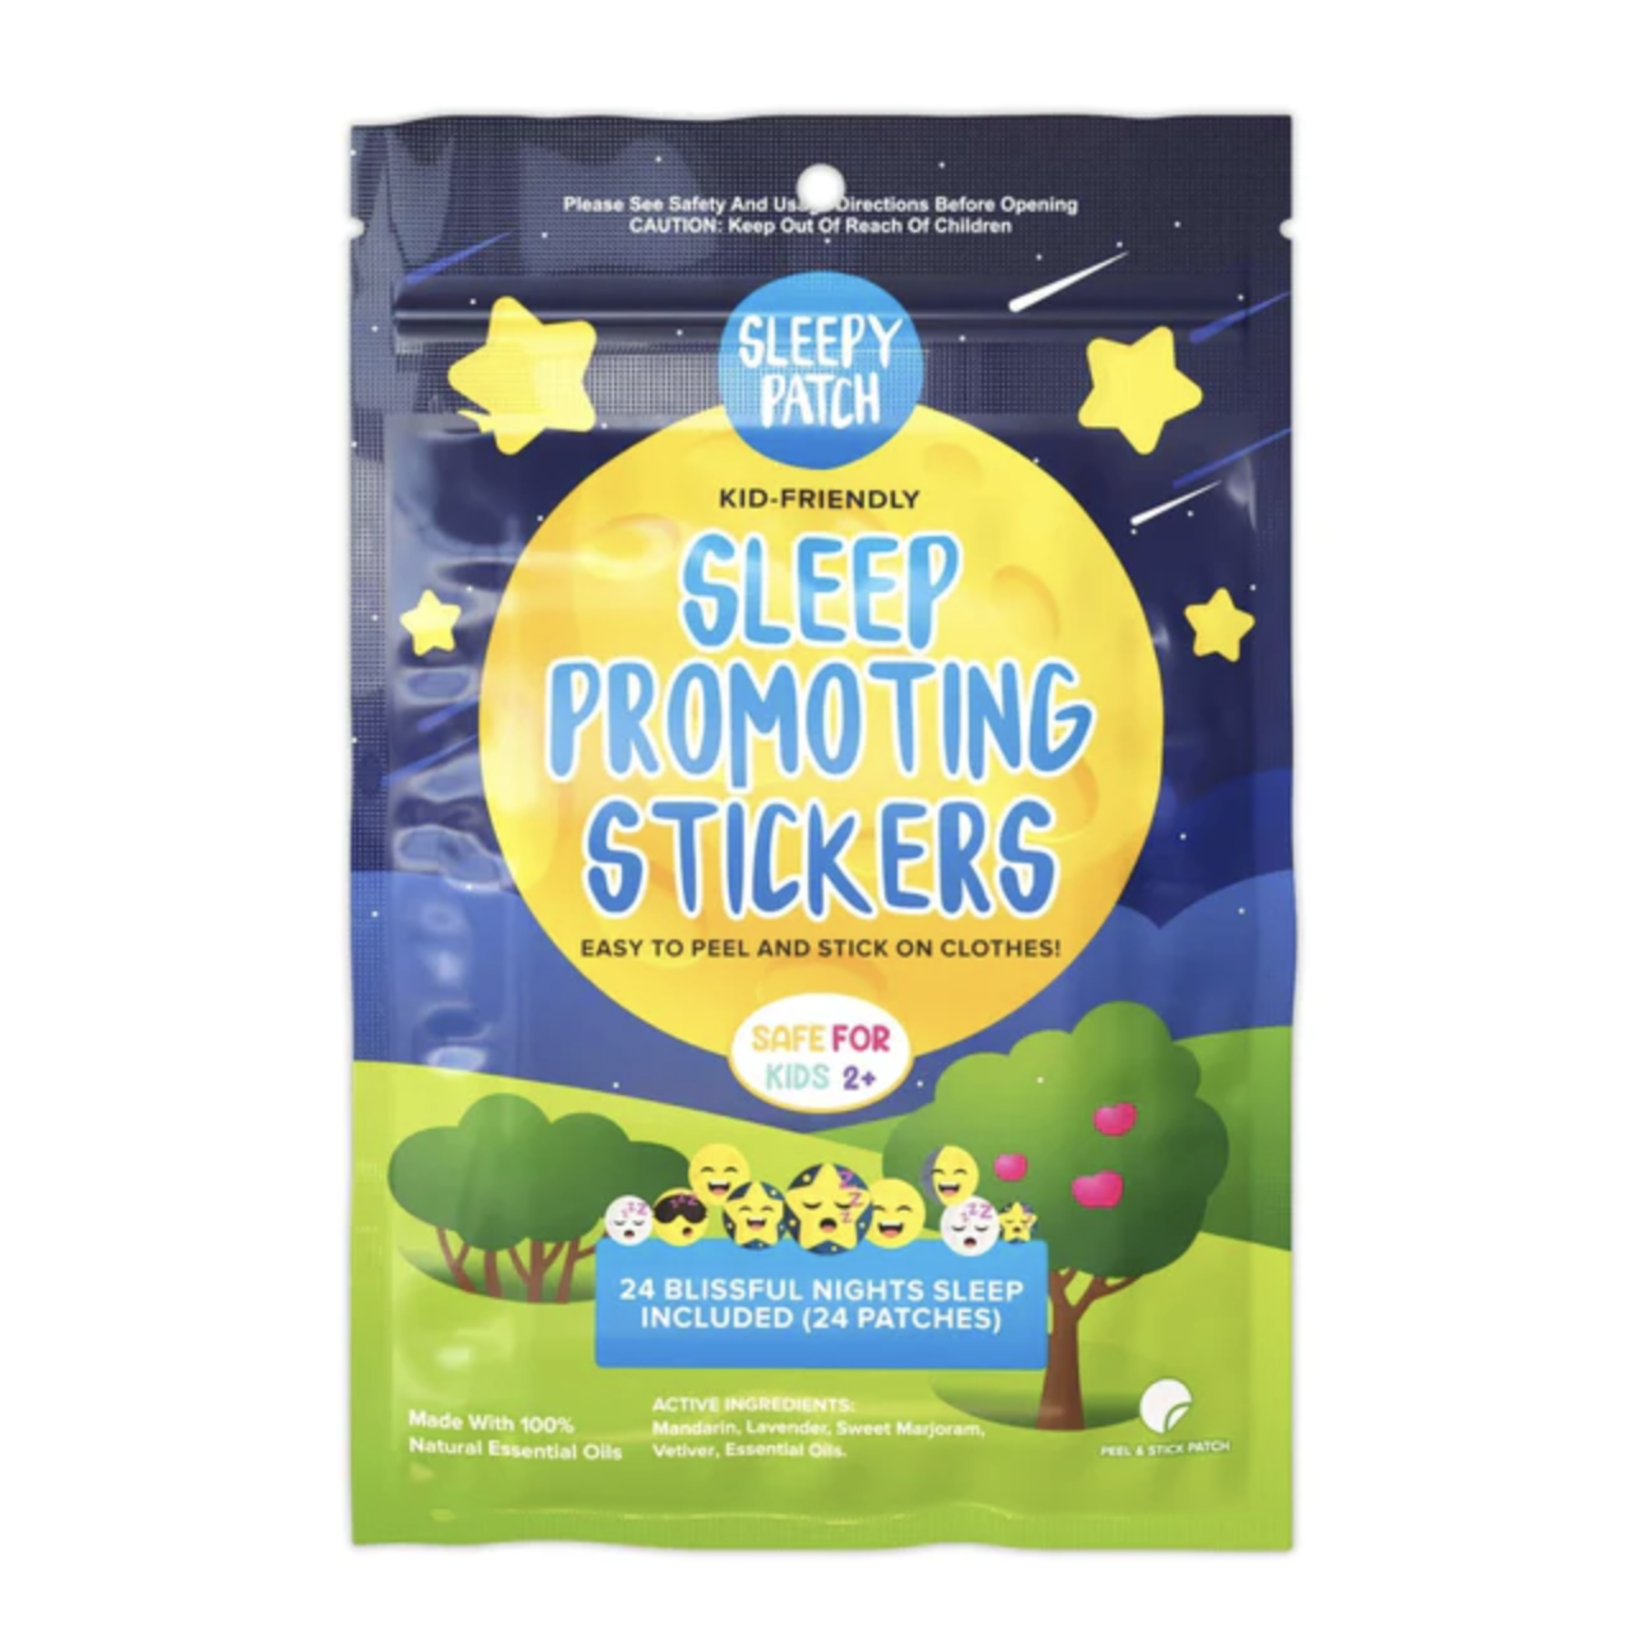 The Natural Patch Co SleepyPatch Sleep Promoting Stickers